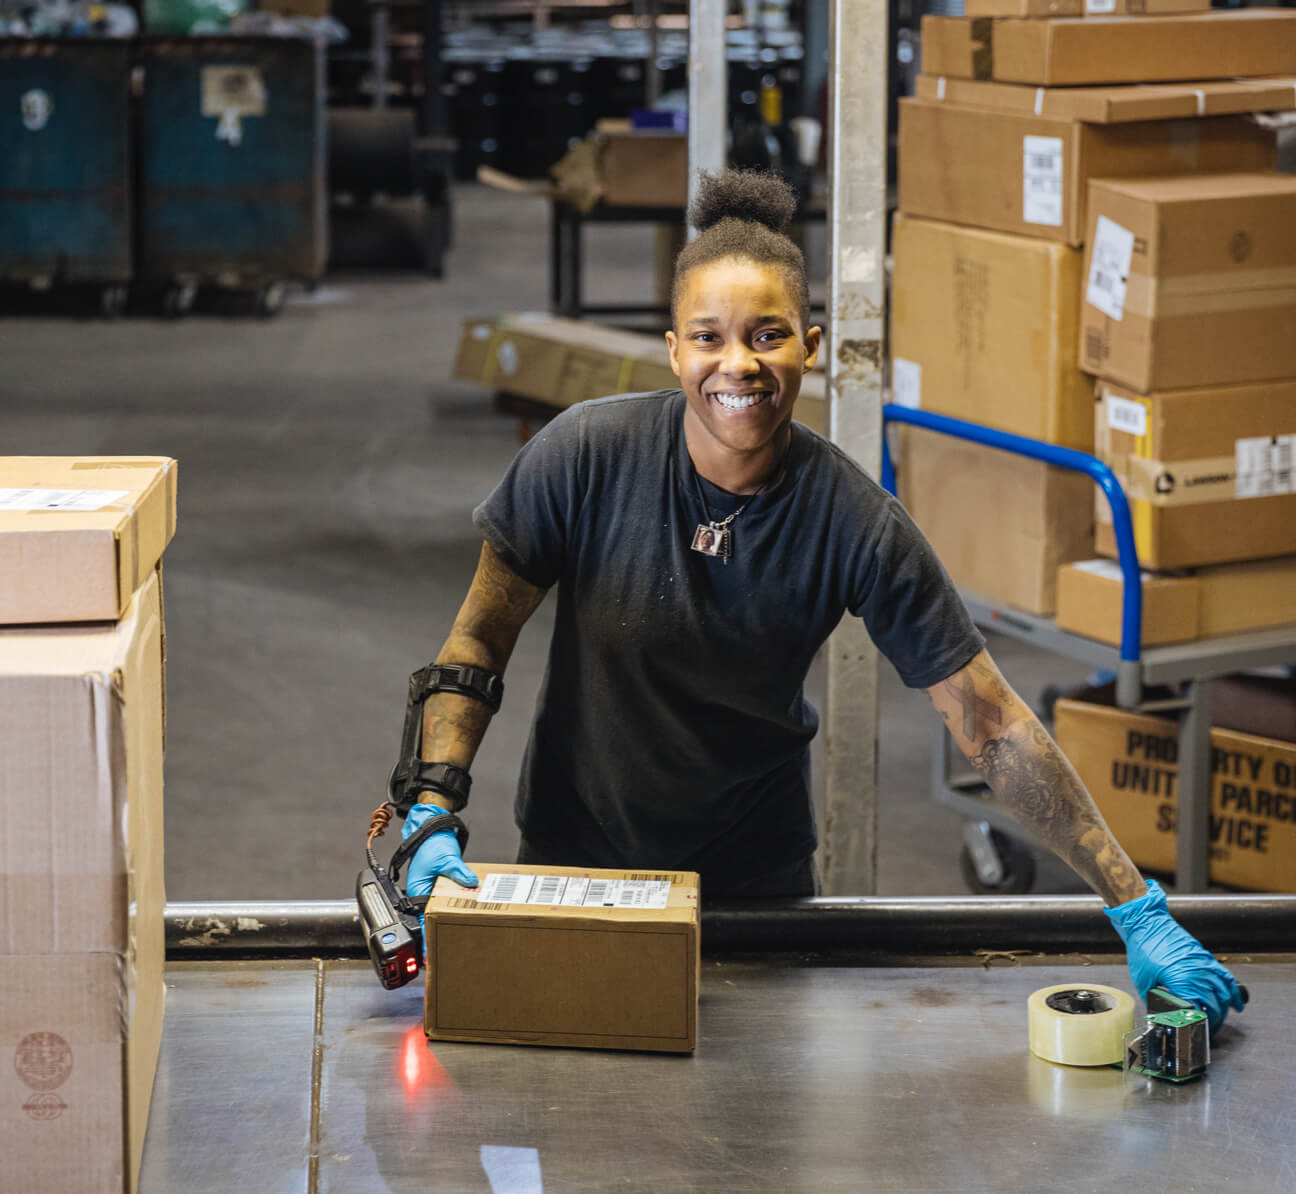 Employee smiling and handling a package while standing in a warehouse